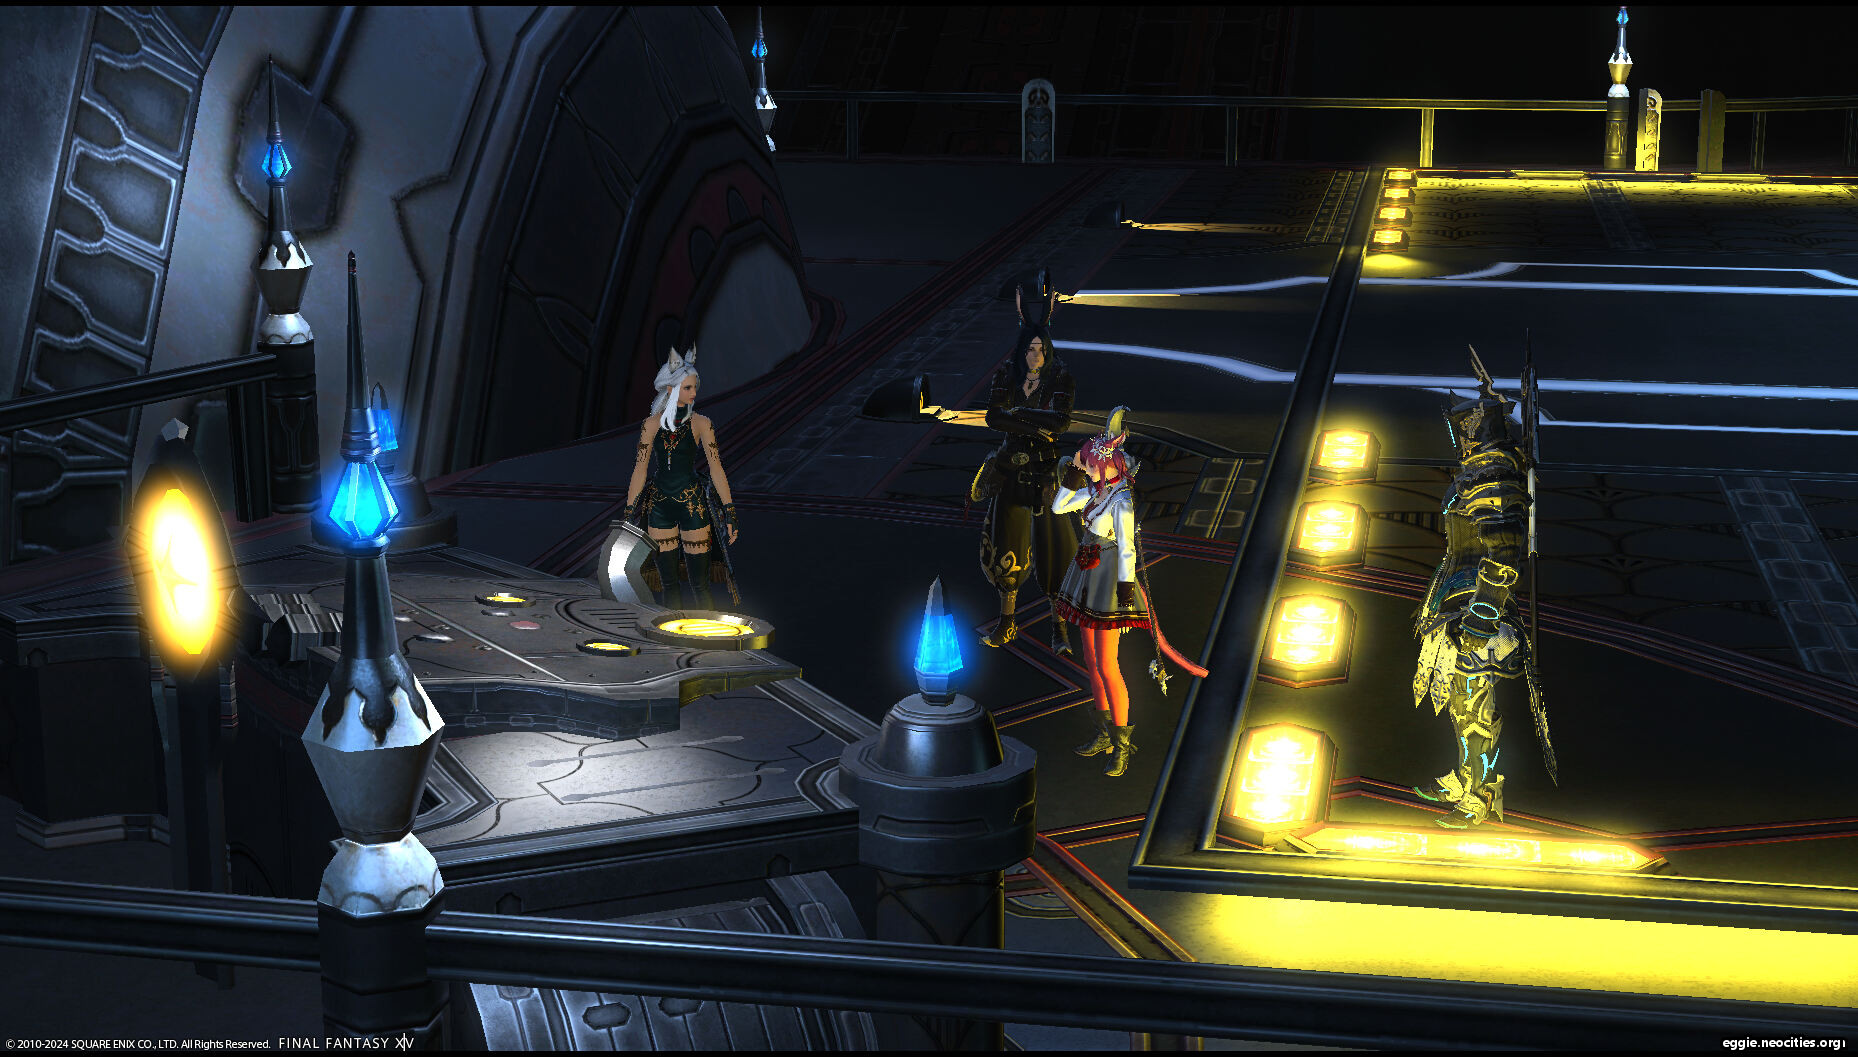 Zel and party on the lift in the Praetorium cutscenes. Cyrene is standing near her.